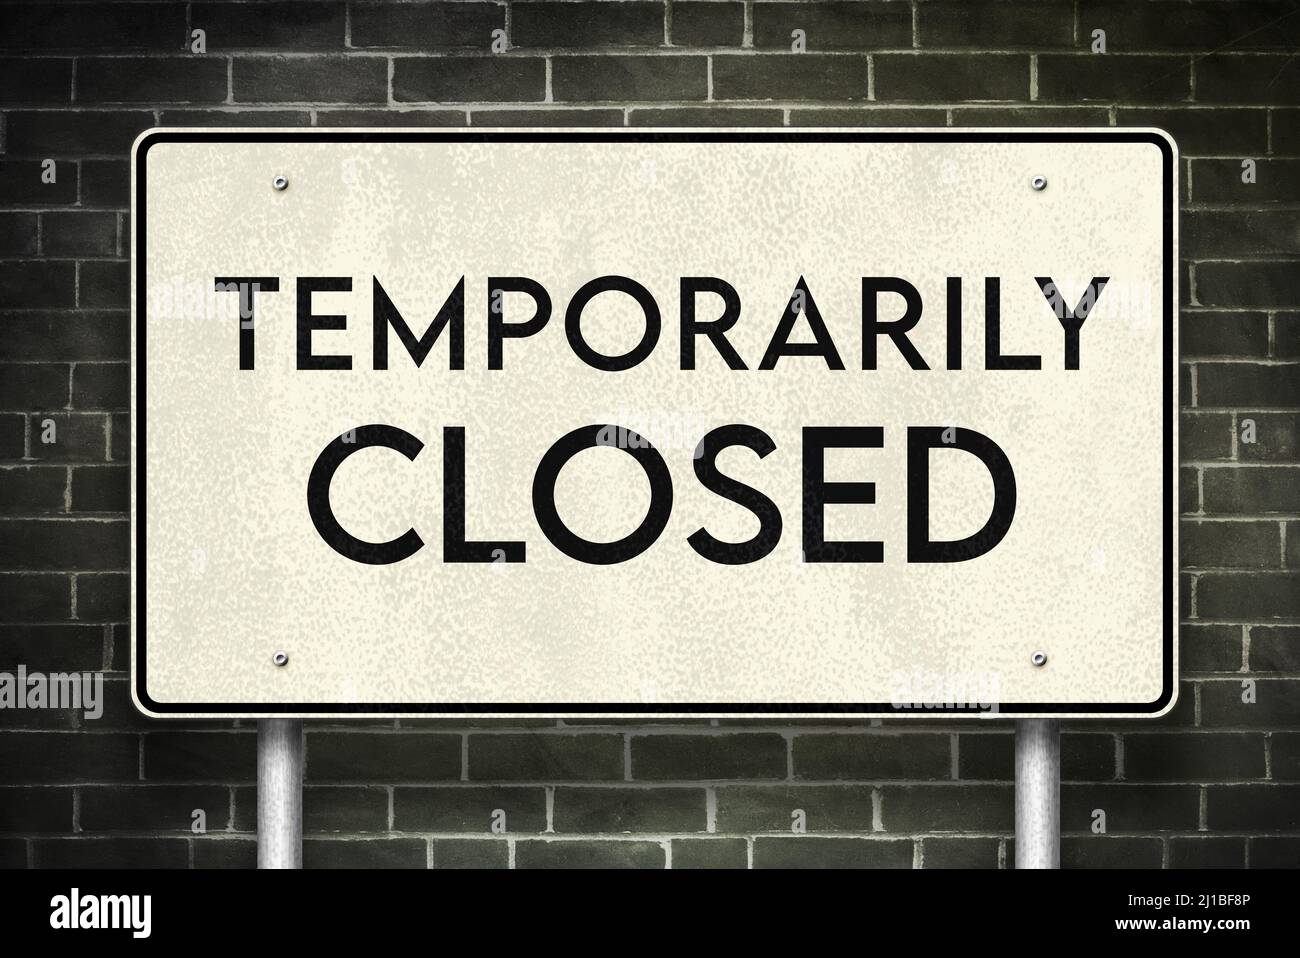 Temporarily Closed road sign information Stock Photo